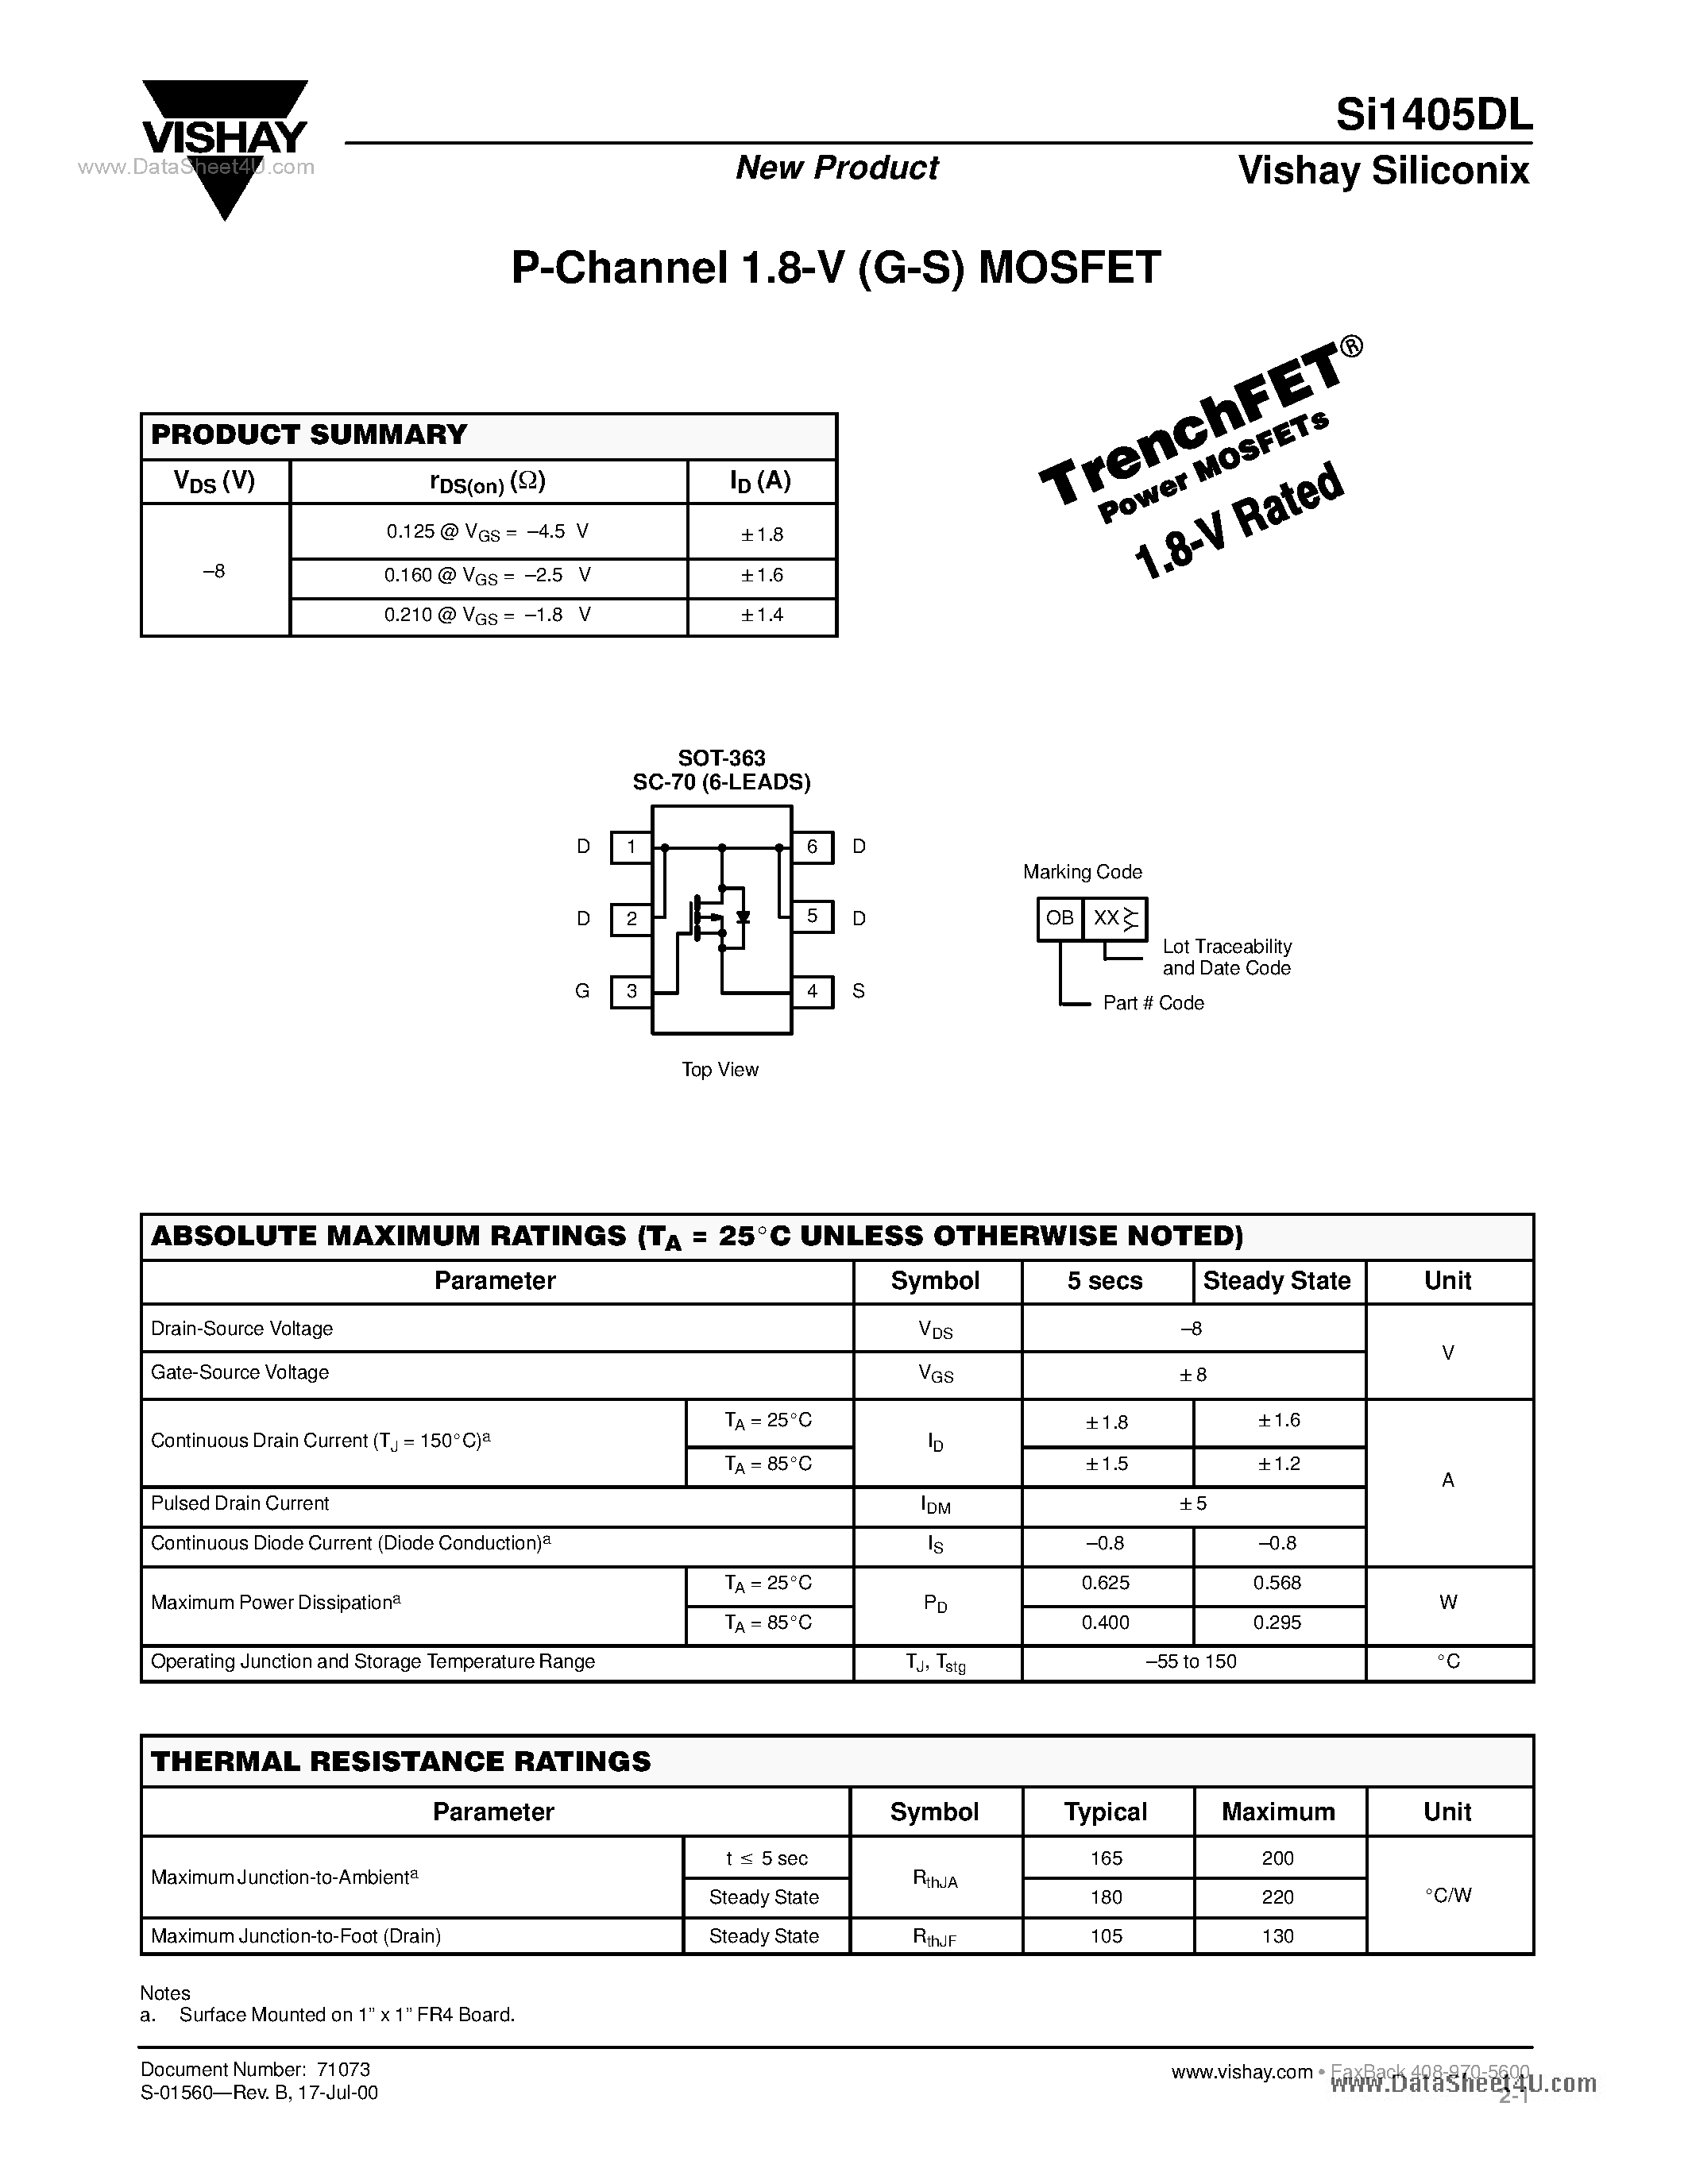 Datasheet SI1405DL - P-Channel 1.8-V (G-S) MOSFET page 1